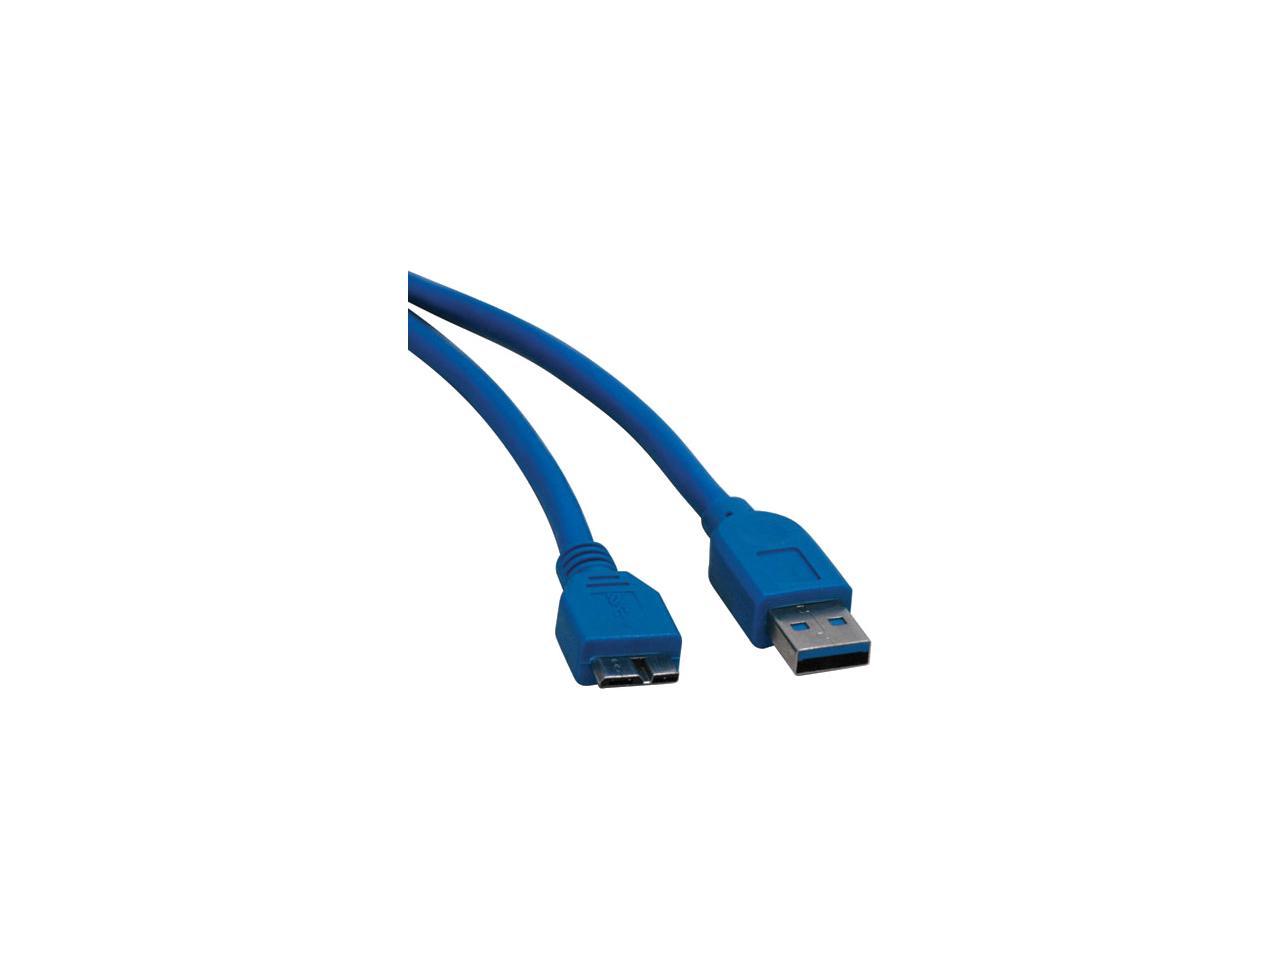 Tripp Lite U326-003 Blue USB 3.0 Super Speed Device cable (A Male to Micro - B Male) - image 1 of 3